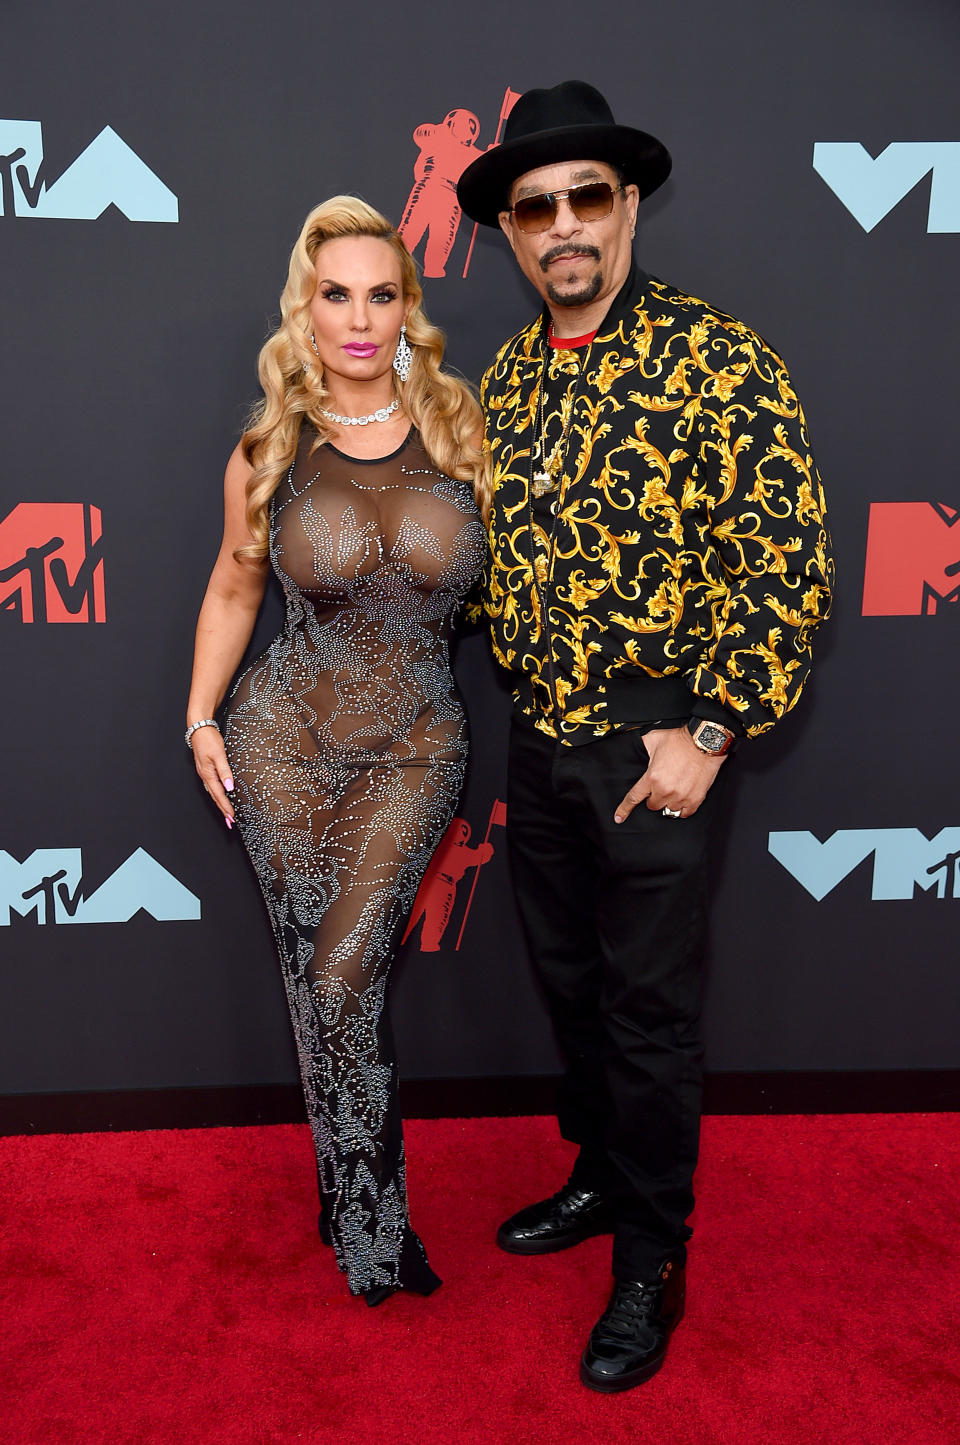 NEWARK, NEW JERSEY - AUGUST 26: Coco A attends the 2019 MTV Video Music Awards at Prudential Center on August 26, 2019 in Newark, New Jersey. (Photo by Jamie McCarthy/Getty Images for MTV)